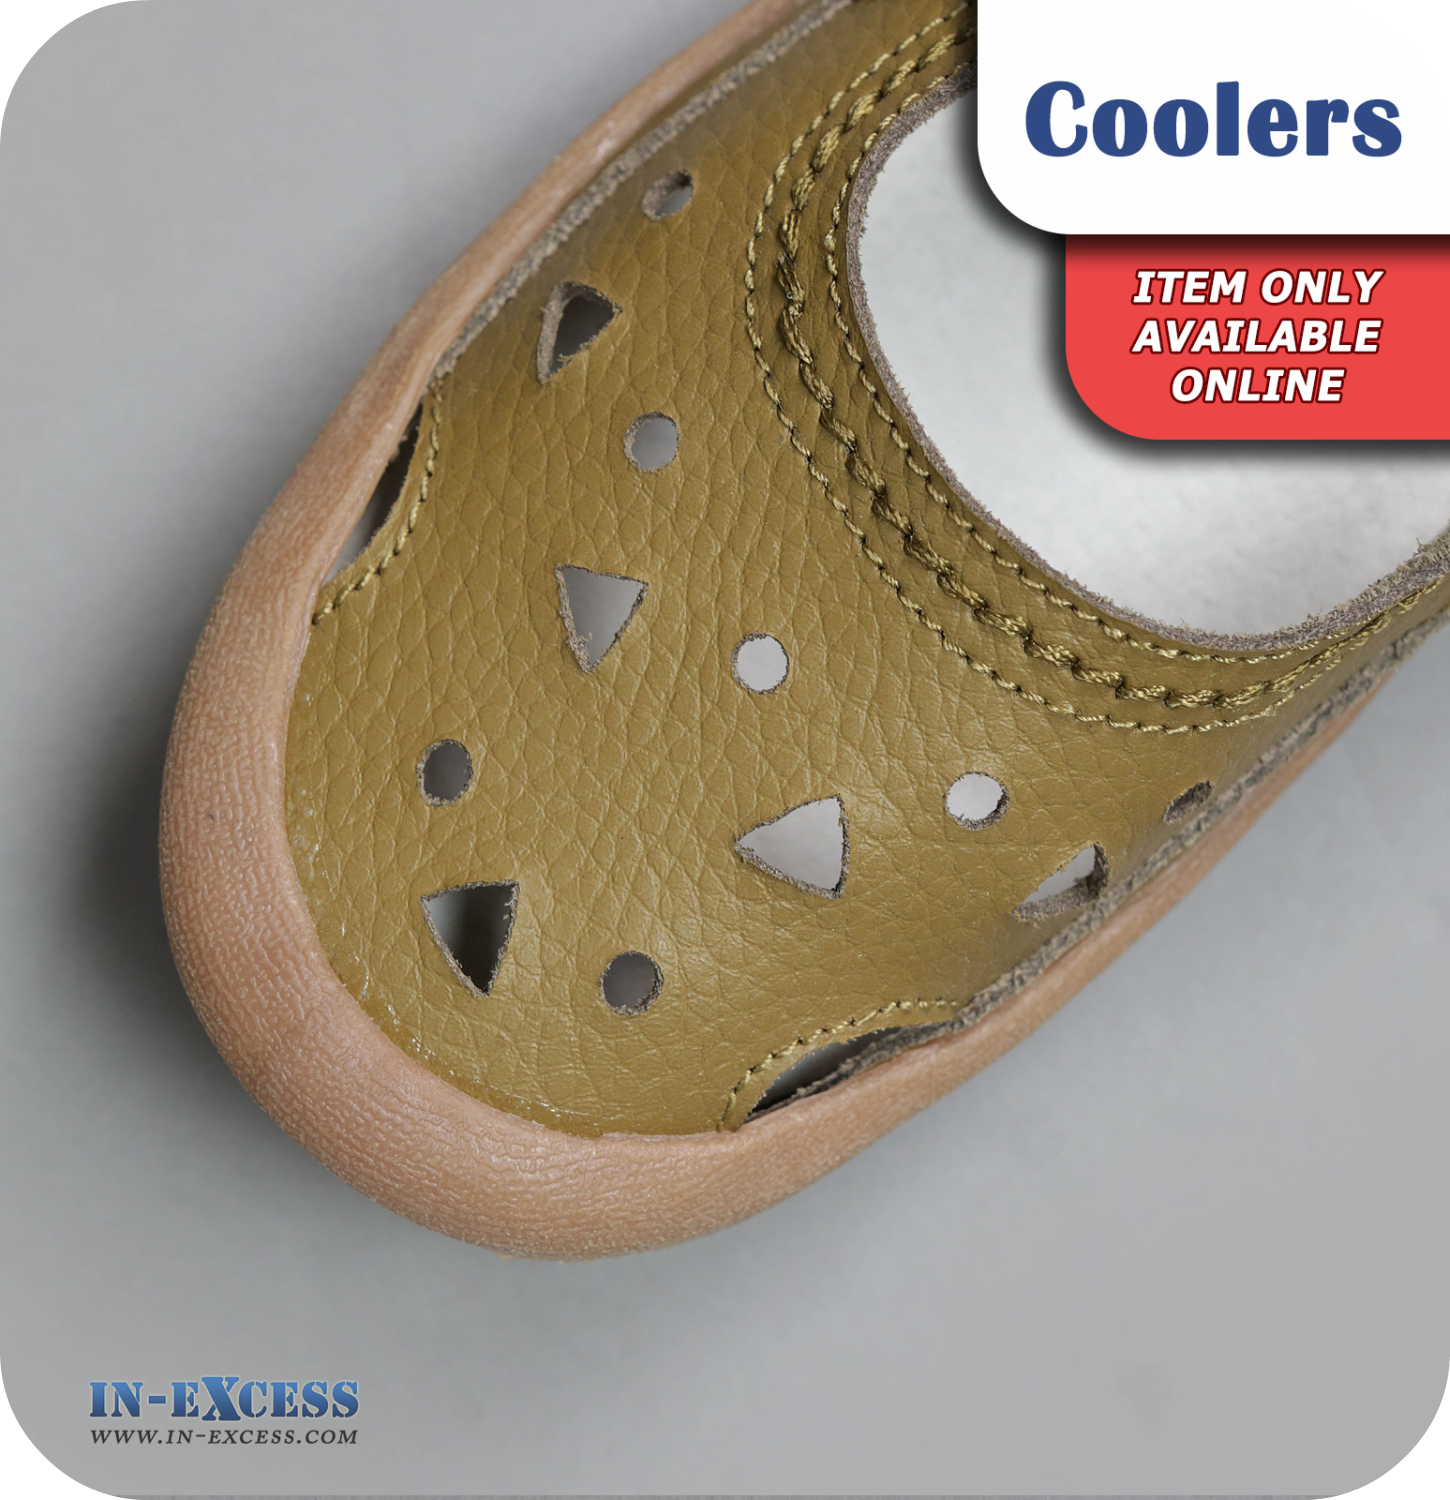 Coolers Premier Leather Sandals - Taupe